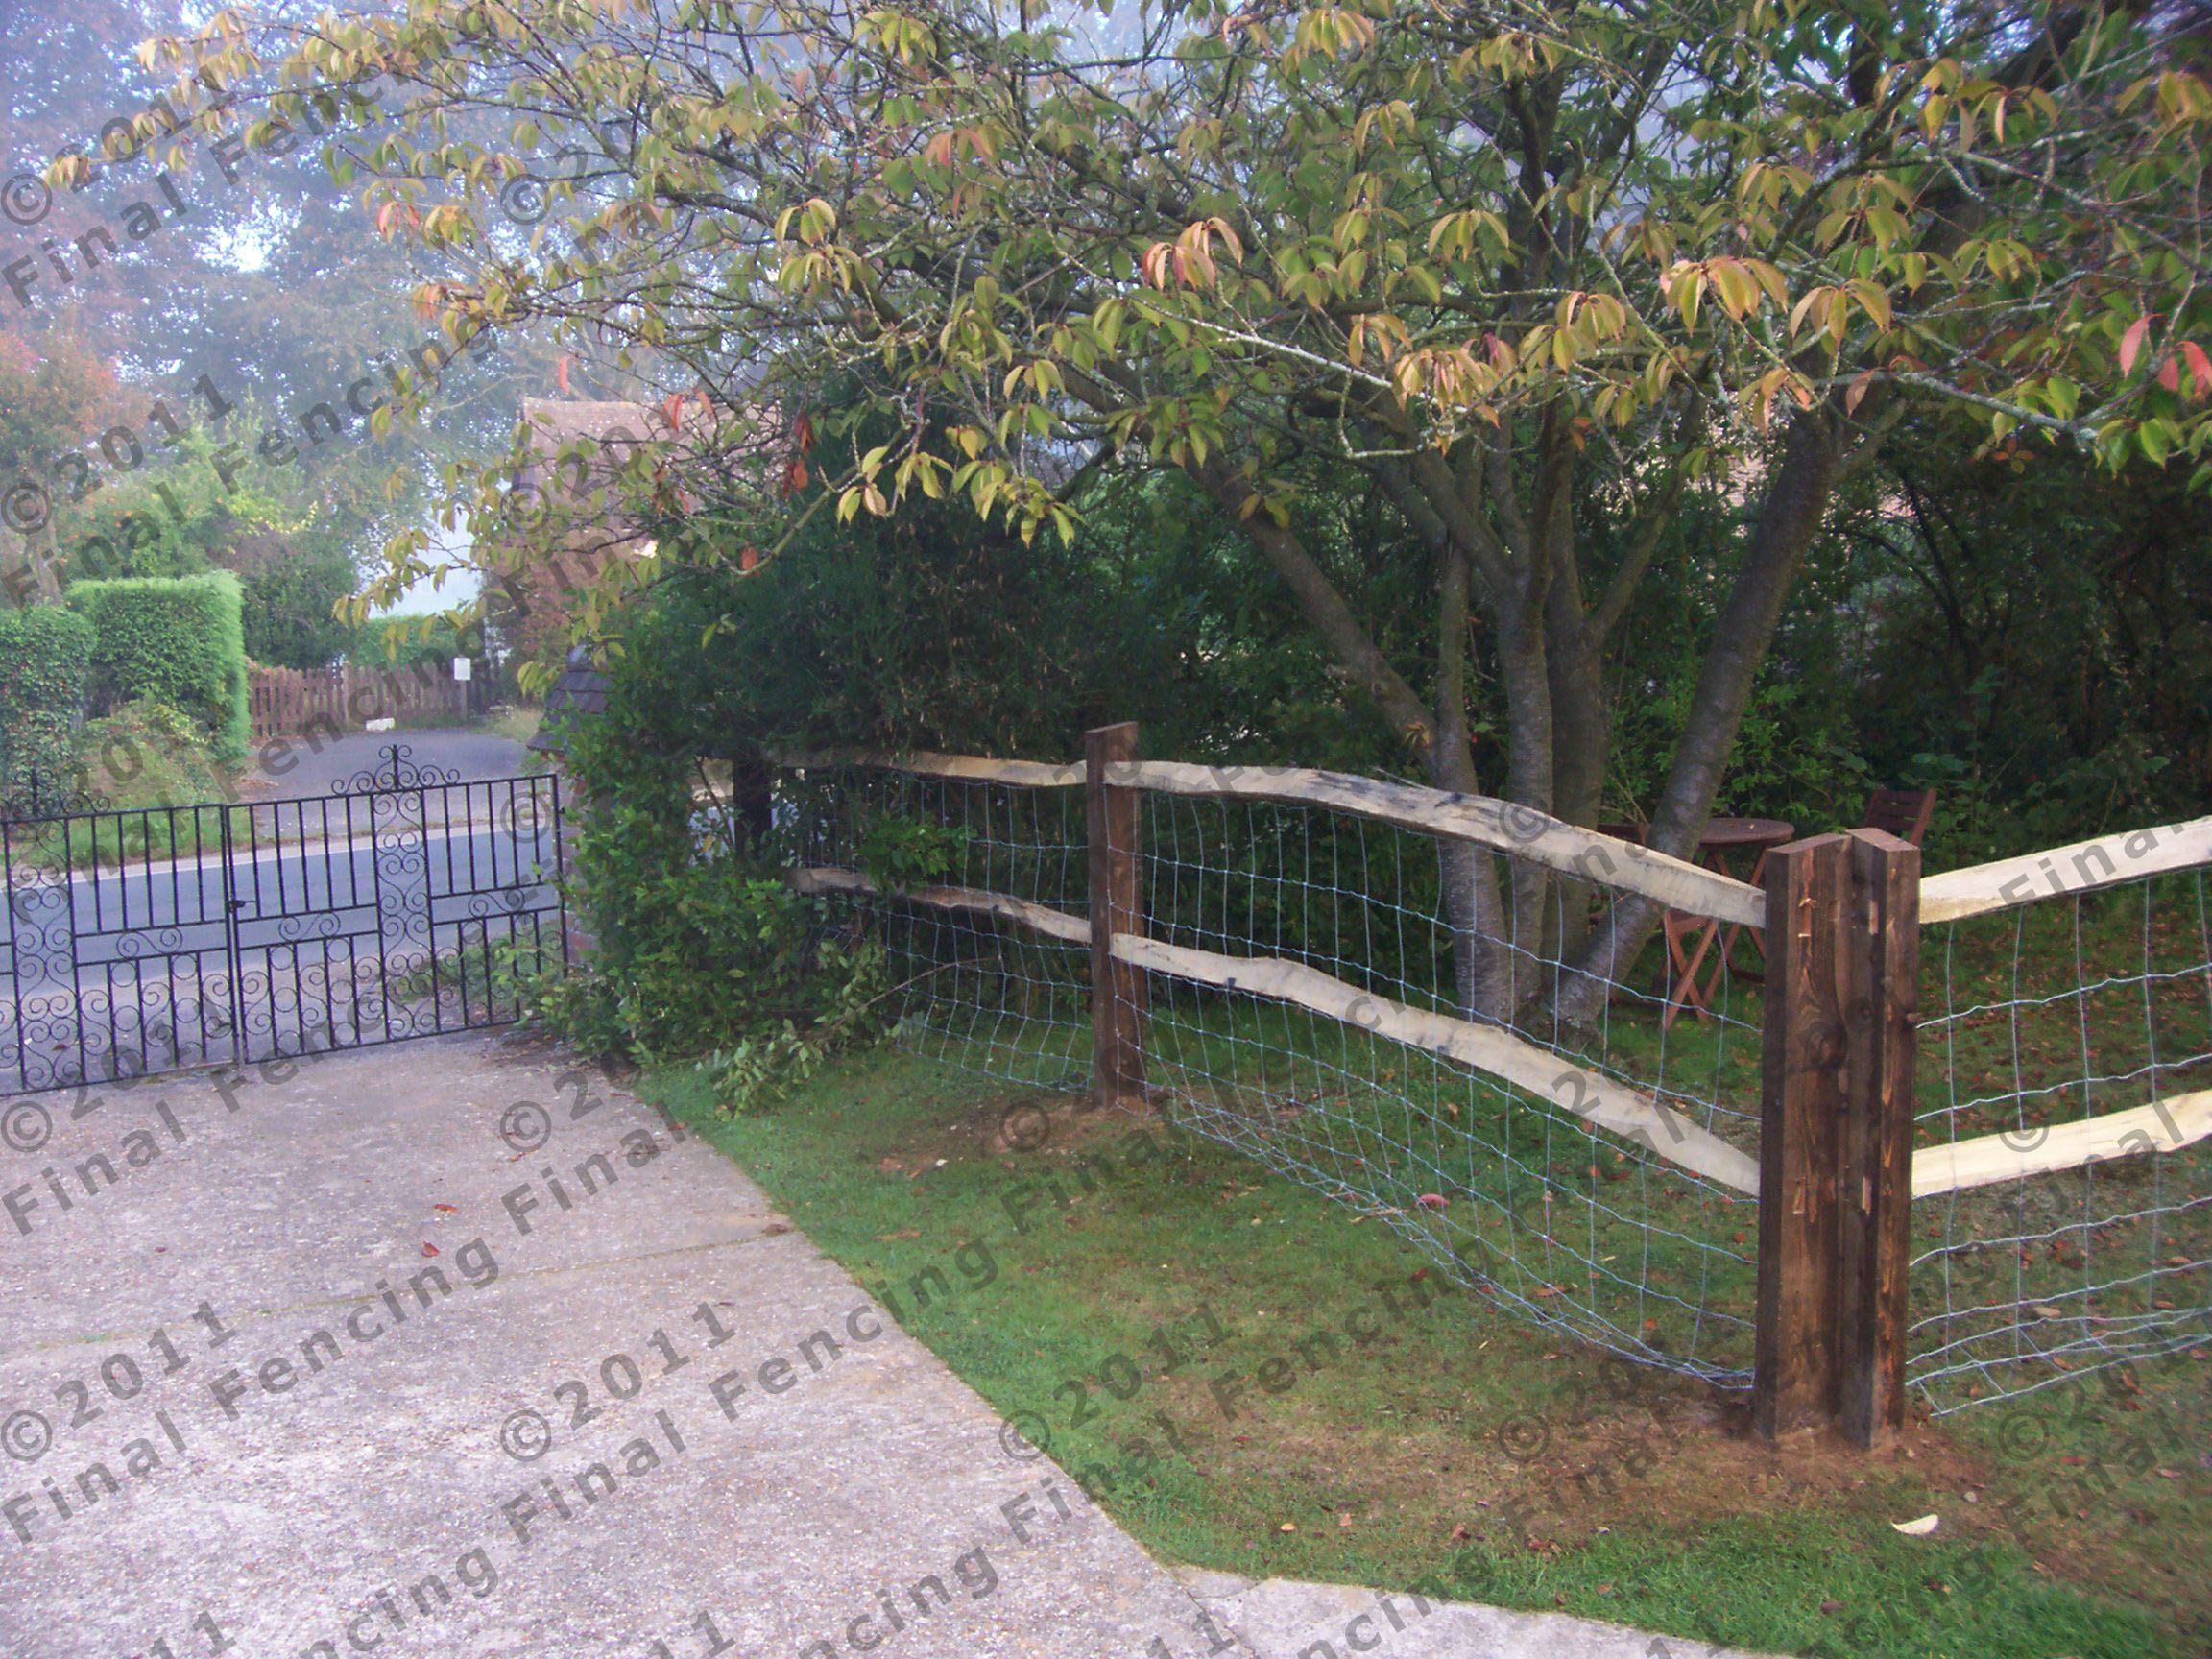 Customer nailed stock fencing after installation